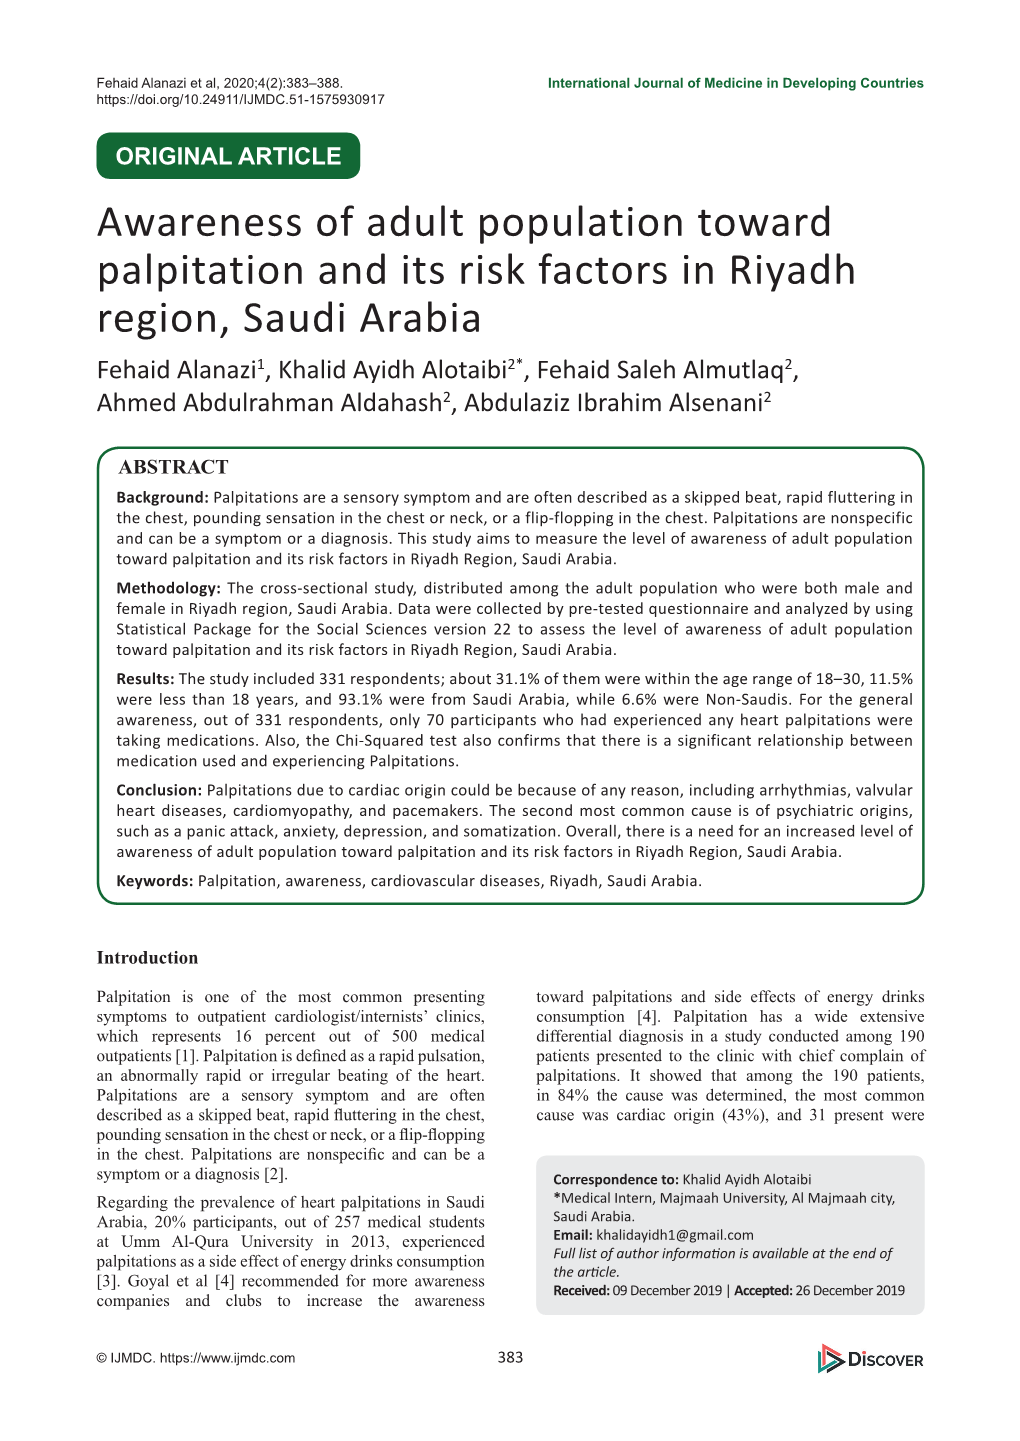 Awareness of Adult Population Toward Palpitation and Its Risk Factors In